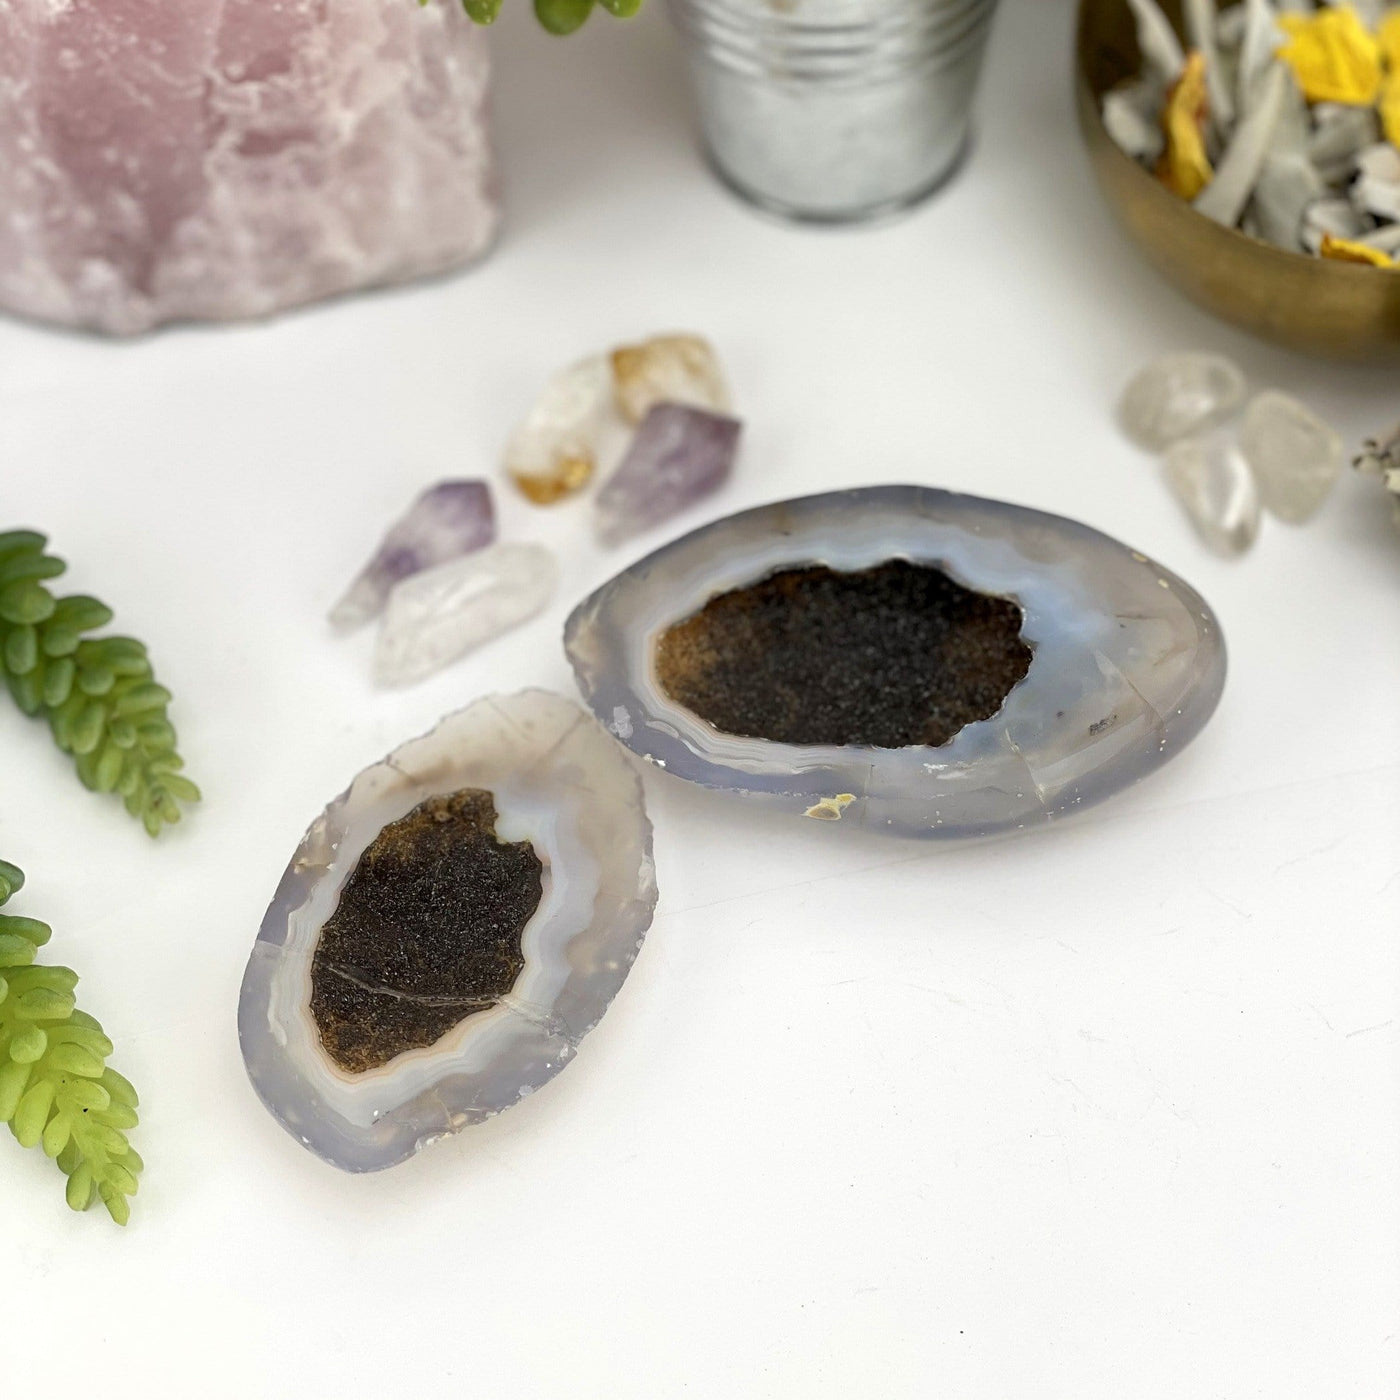 An open agate Geode Box on a light colored surface displaying internal druzy and pattern. Crystals and plants in the background.